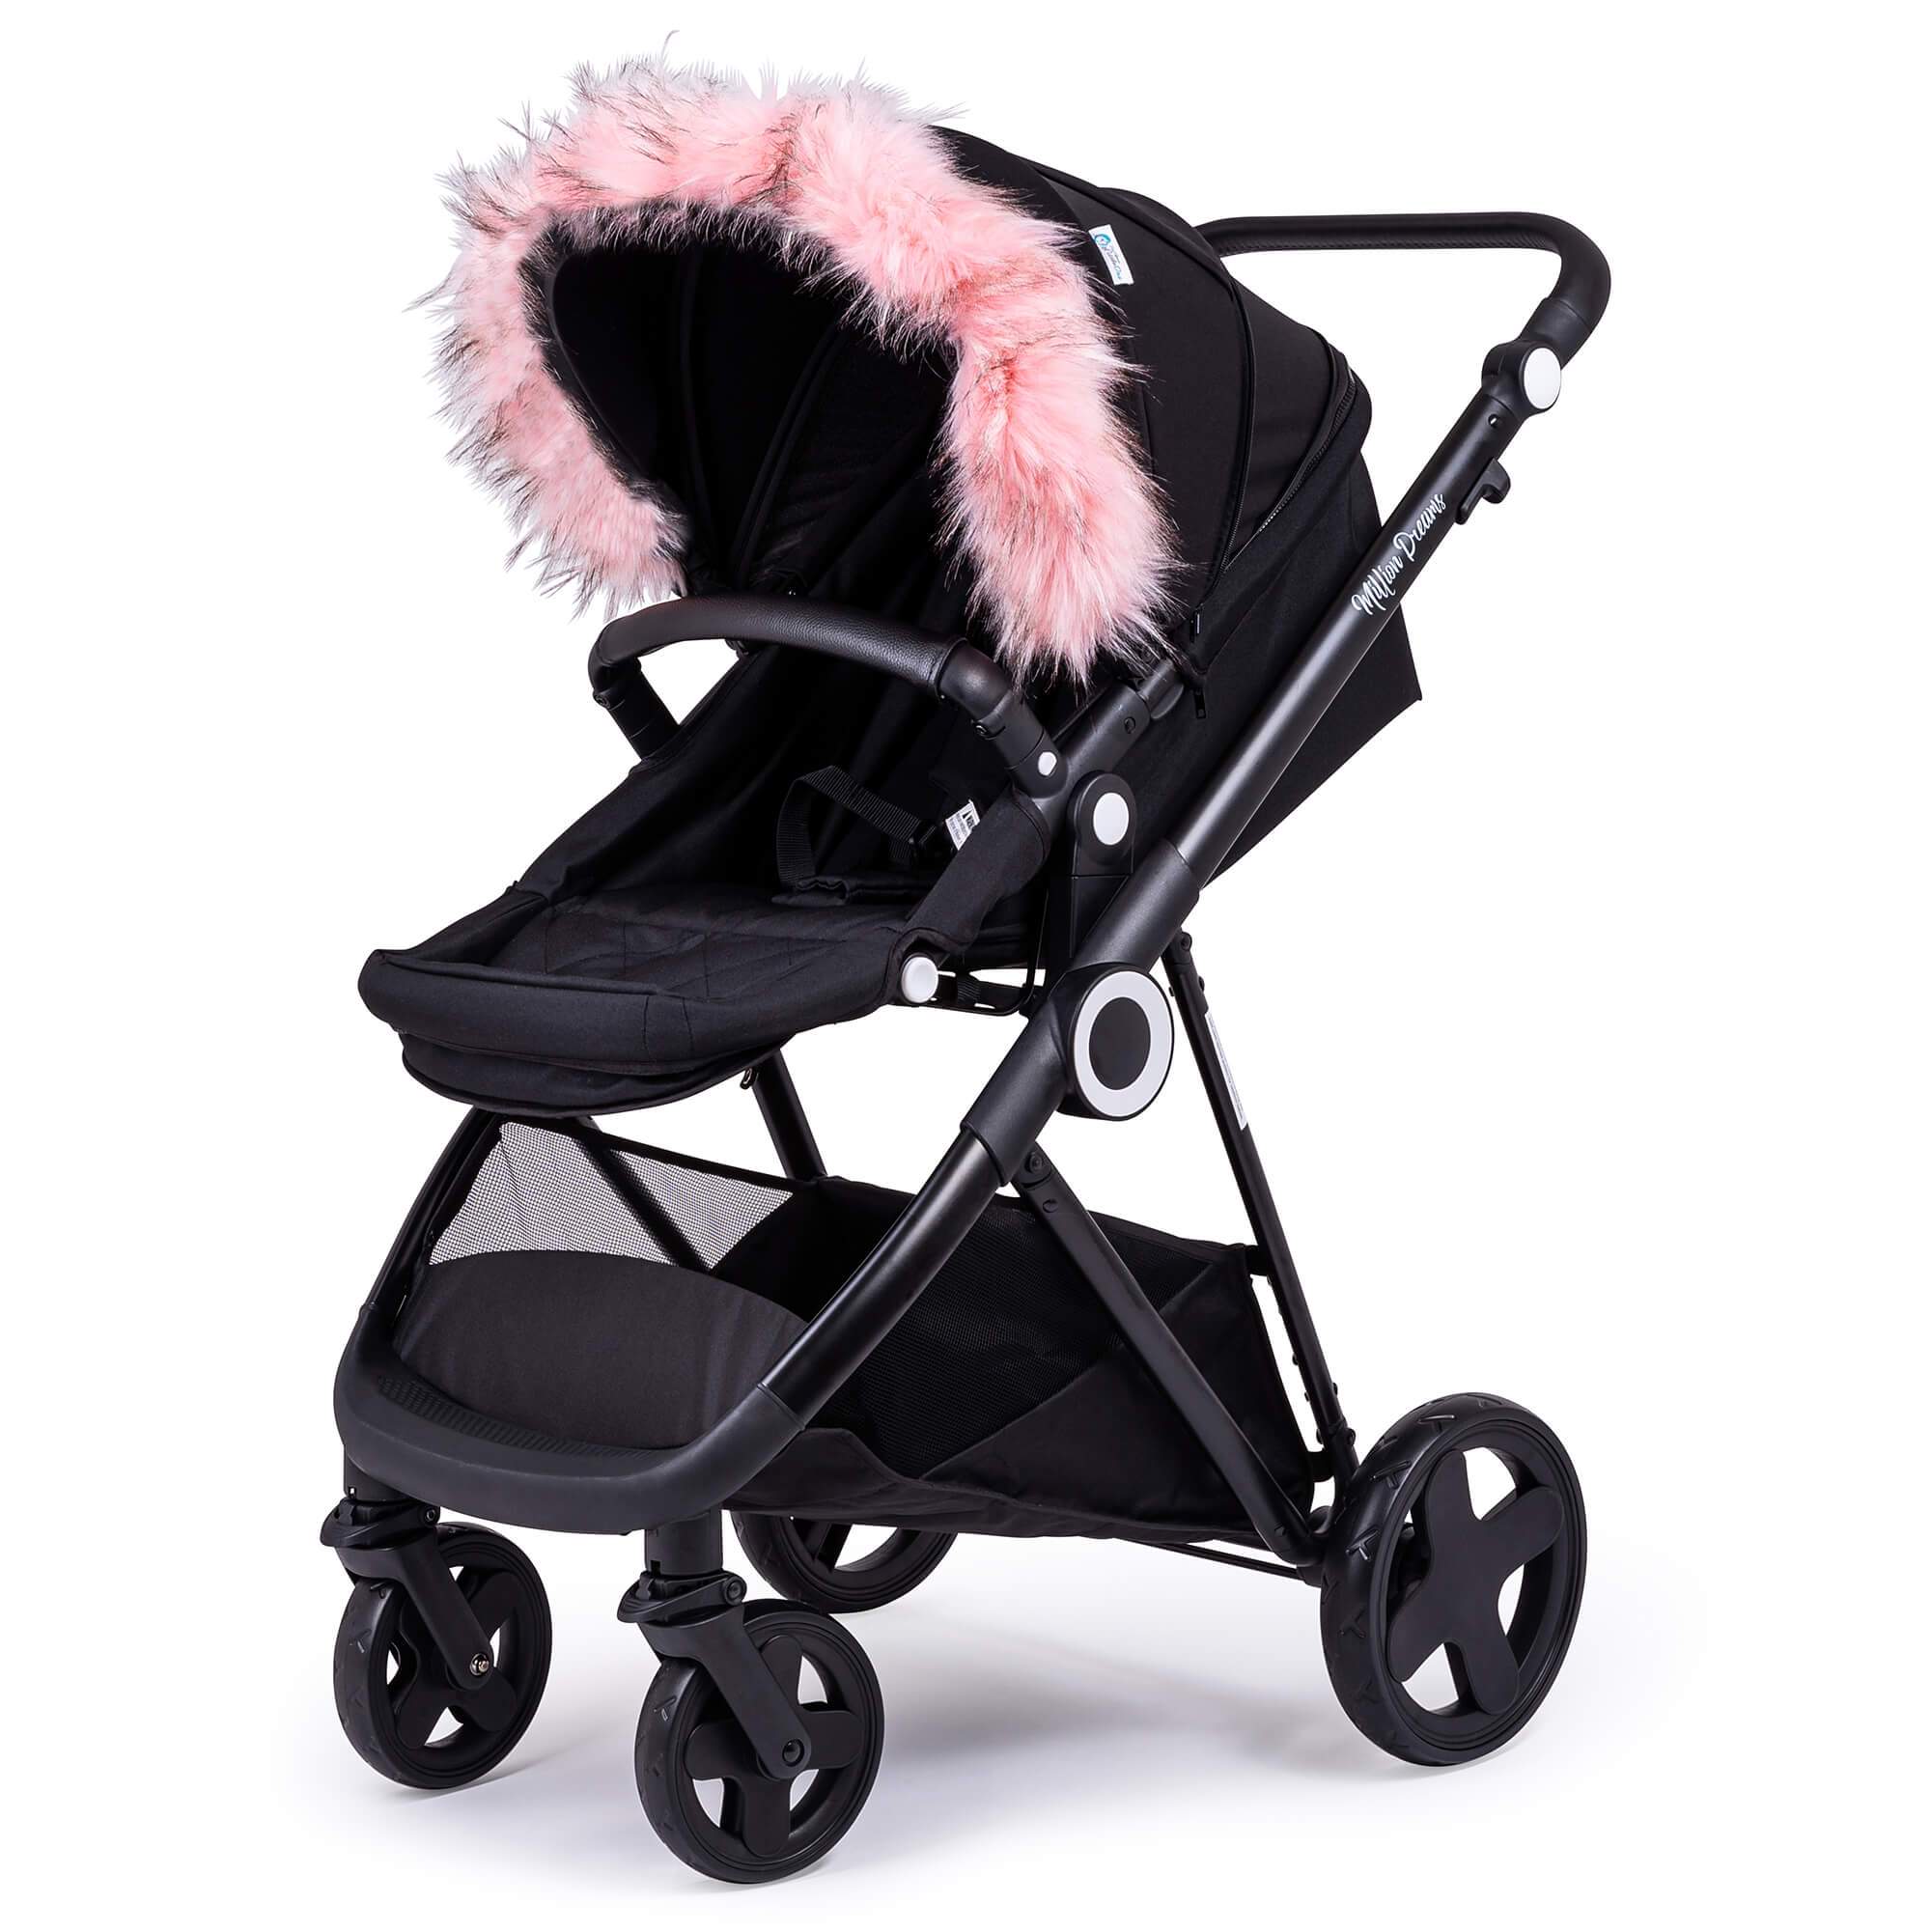 Pram Fur Hood Trim Attachment for Pushchair Compatible with Quinny - Light Pink / Fits All Models | For Your Little One